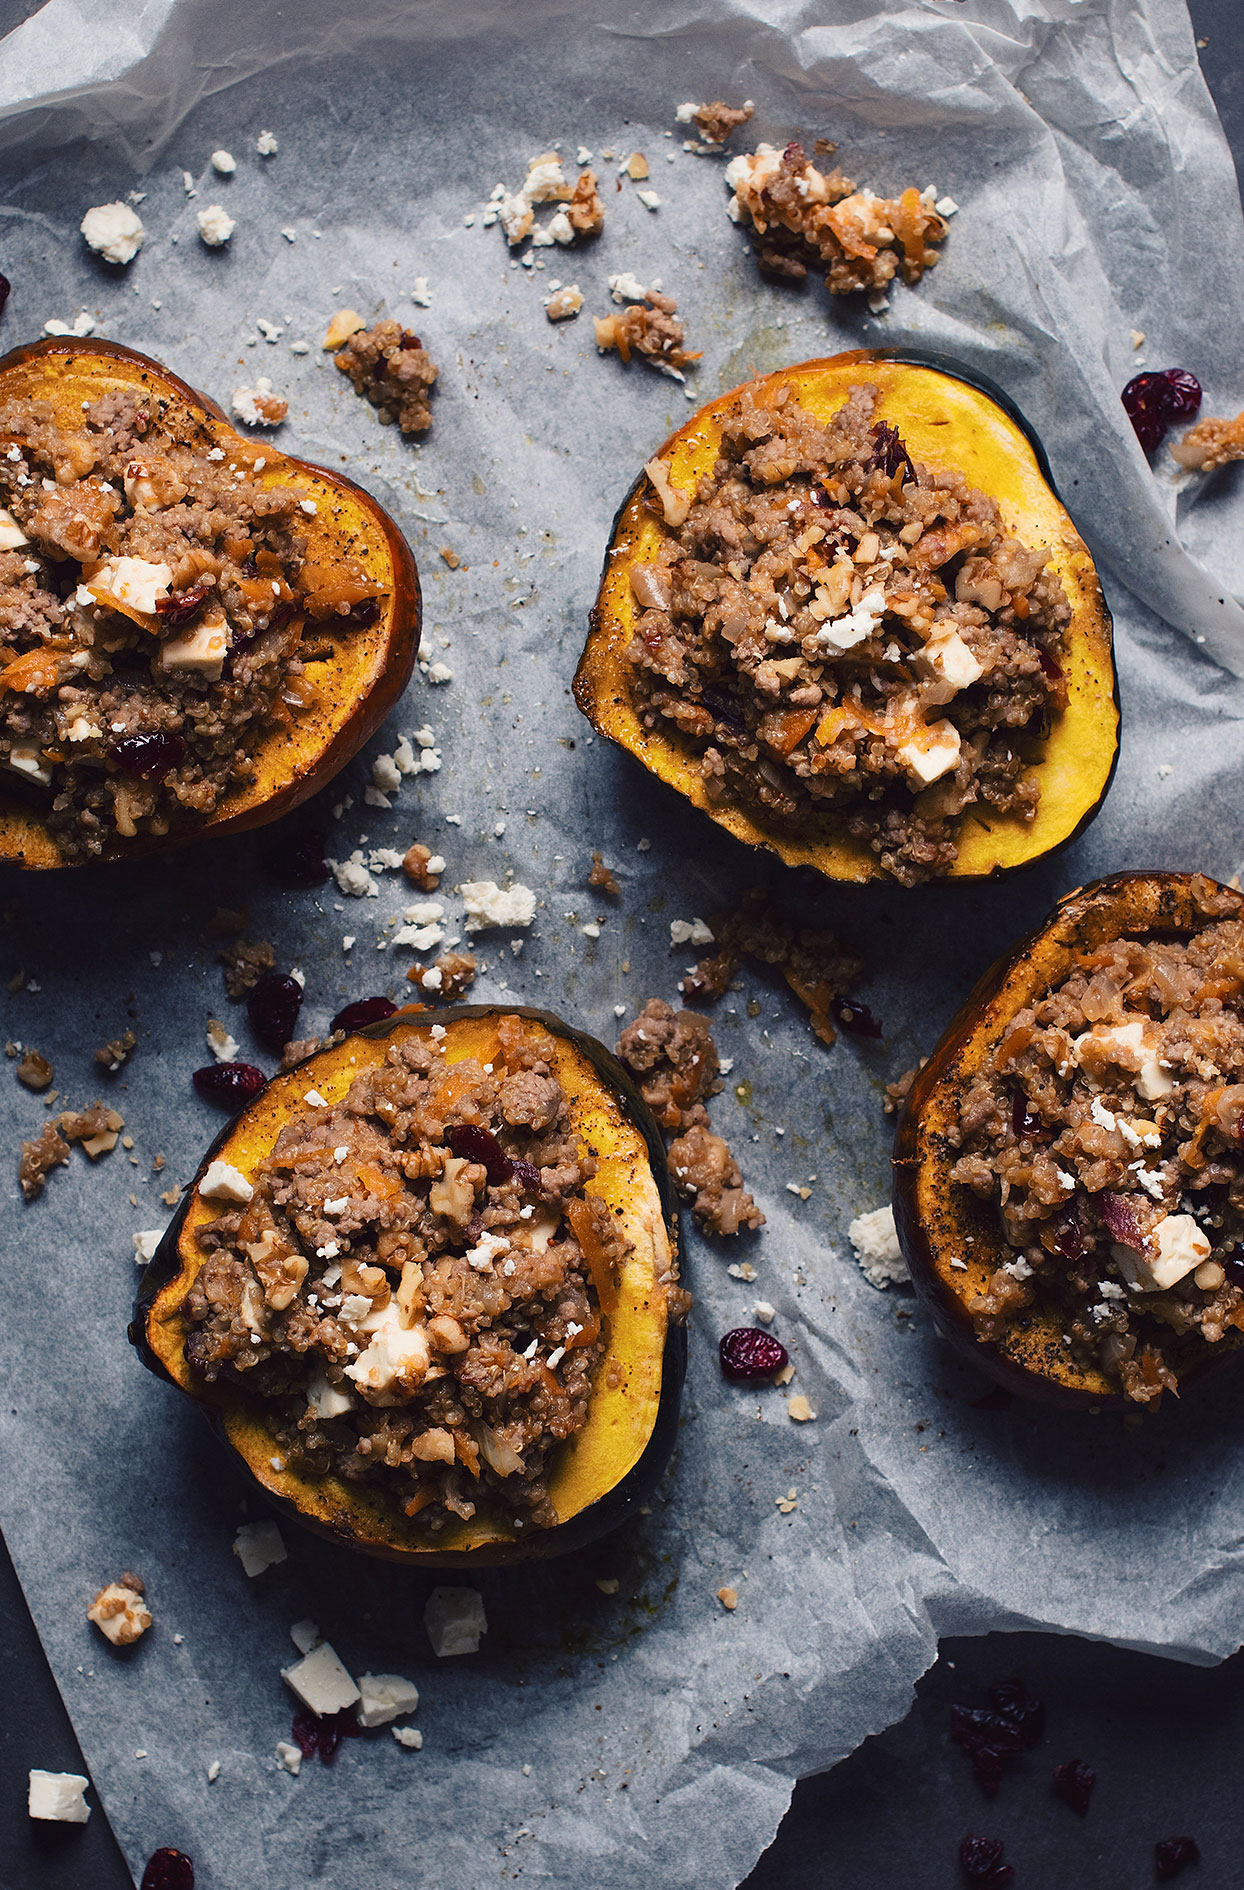 Stuffed acorn squash with quinoa, veal and apples